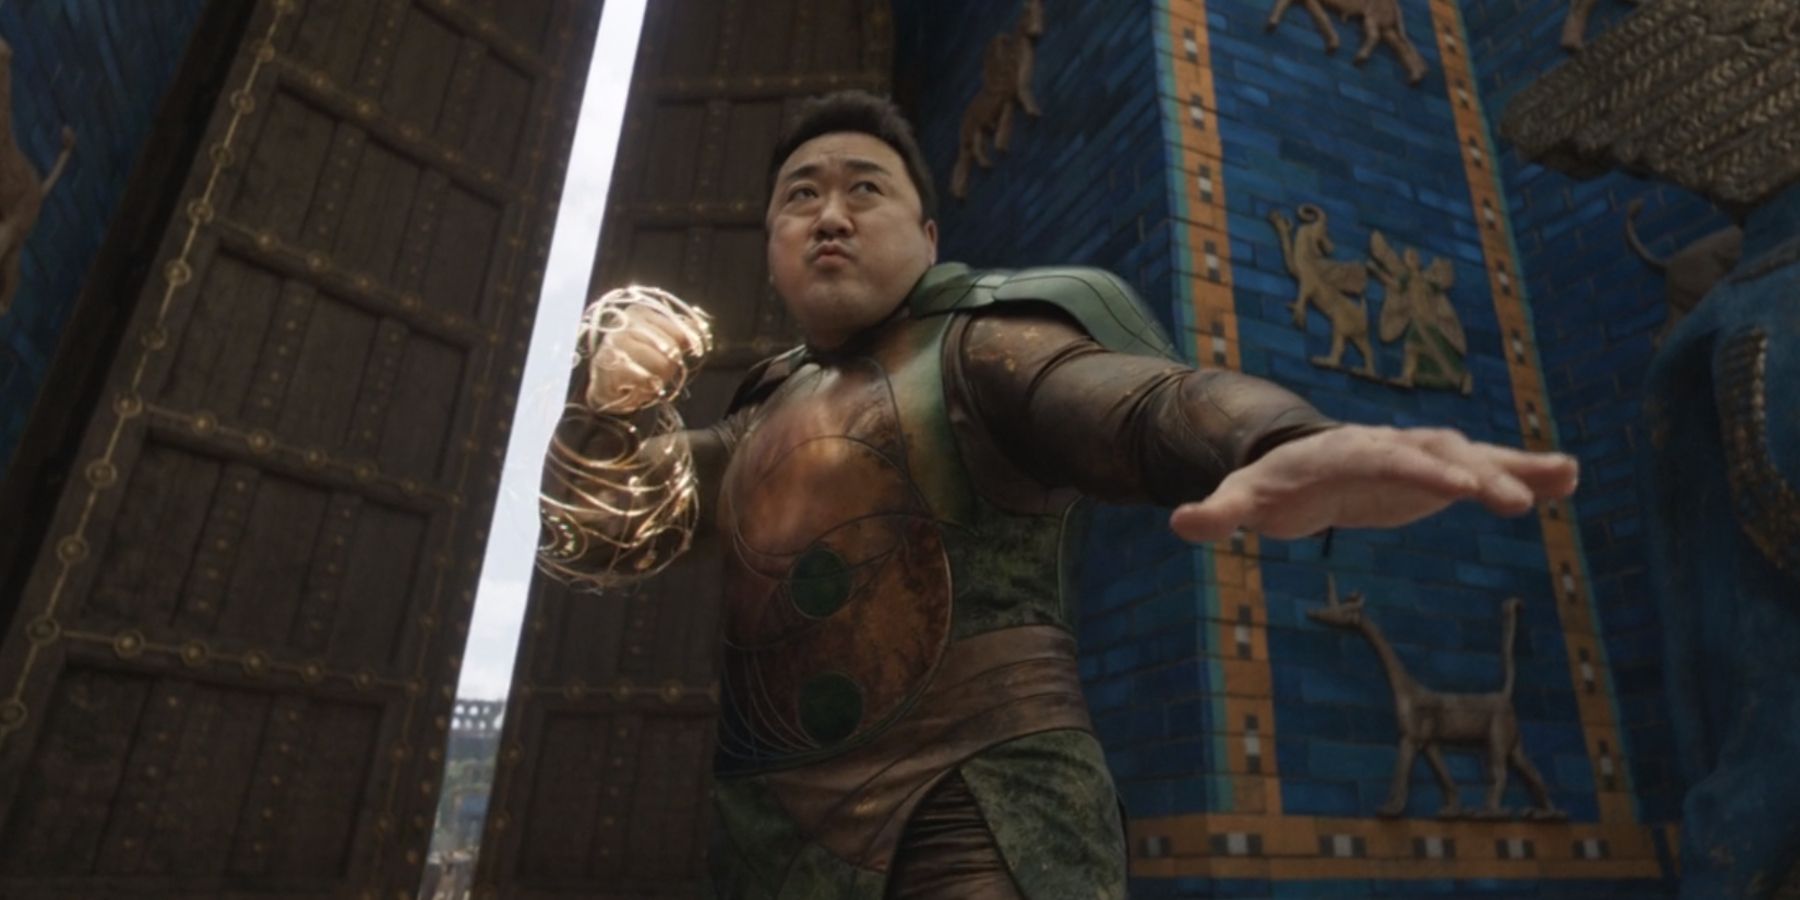 Don Lee as Gilgamesh readying his cosmic energy fist in Eternals